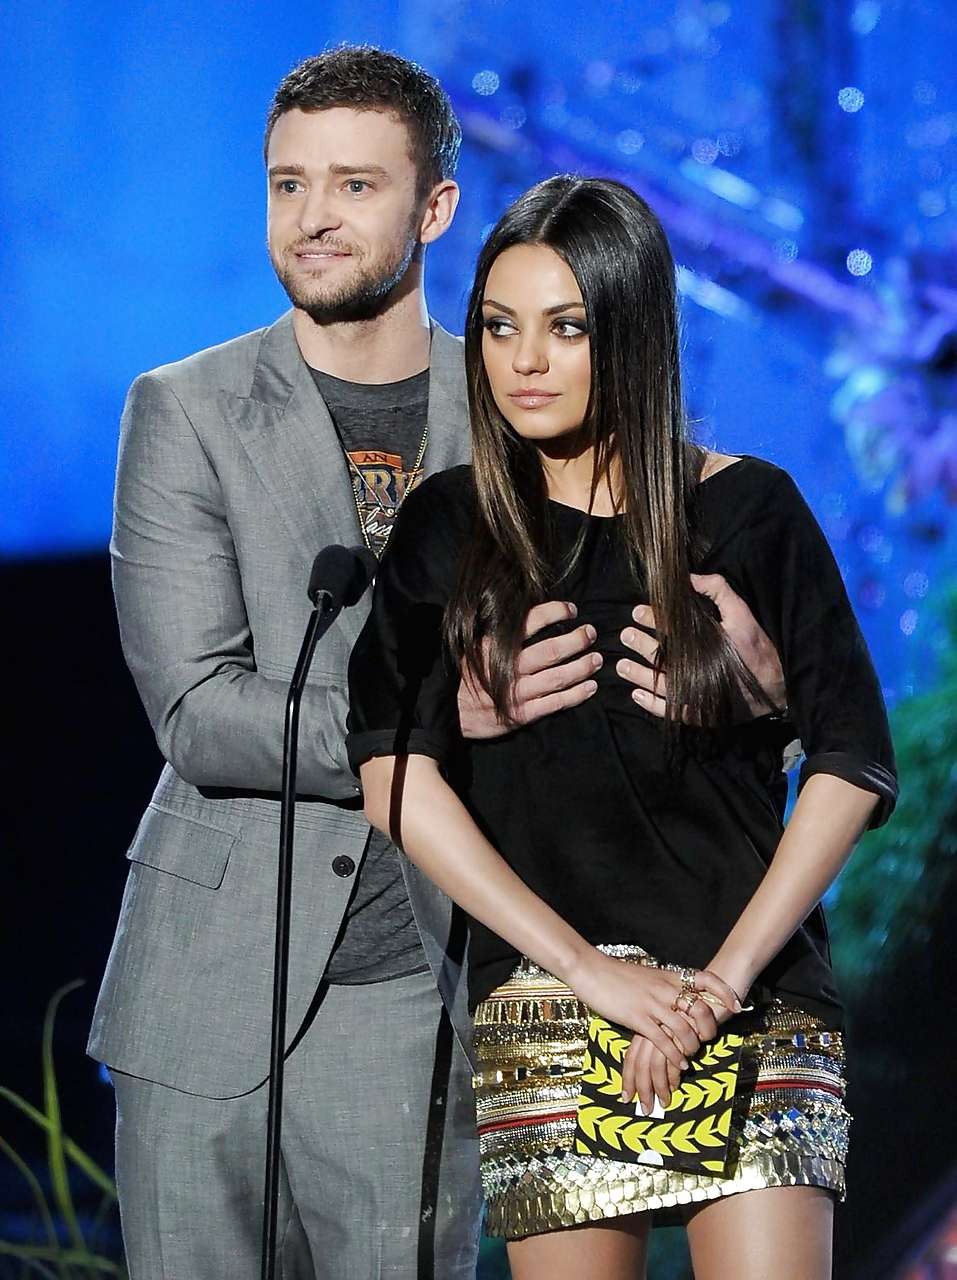 Mila Kunis gets her tits grabbed by Justin Timberlake paparazzi pictures #75300027